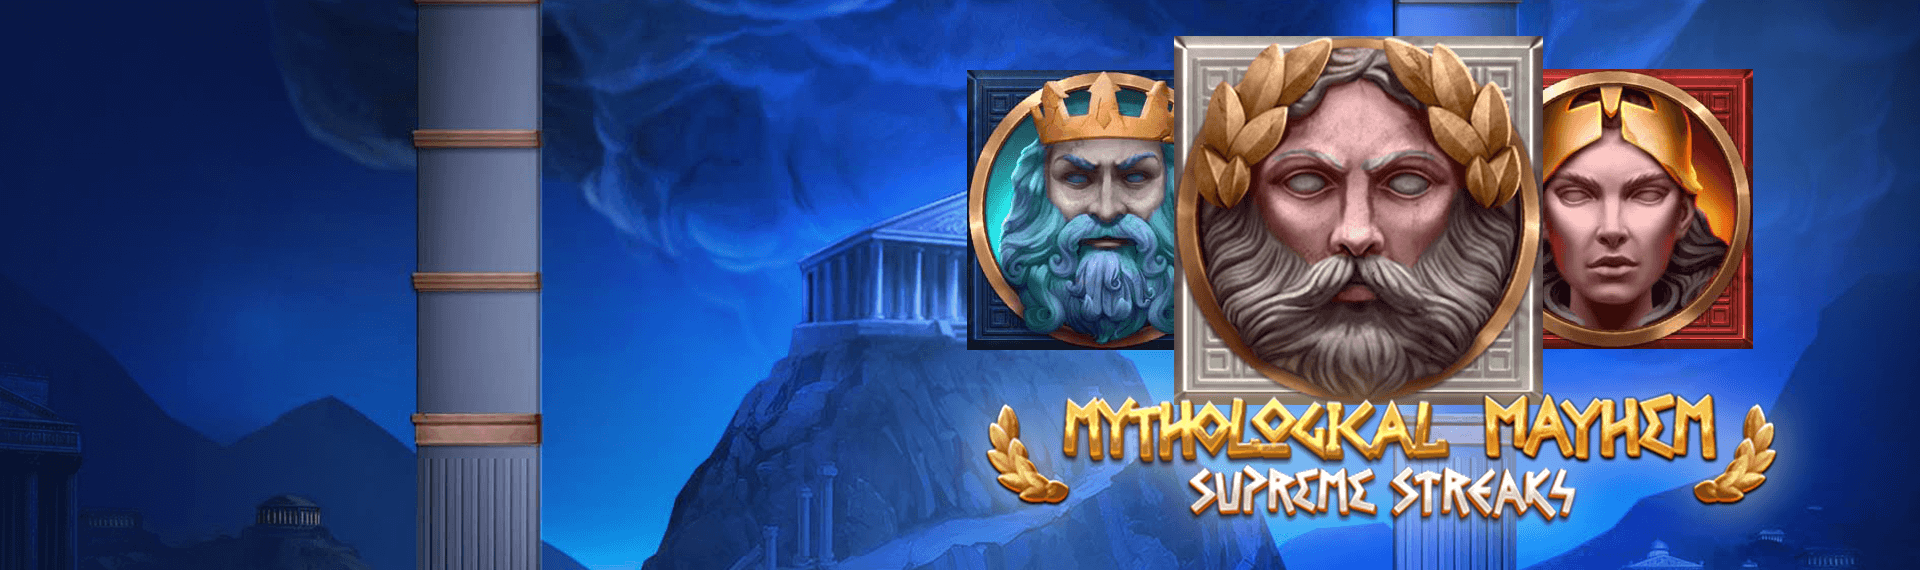 Mythological Mayhem Supreme Streaks Screenshot <br />
<b>Notice</b>:  Undefined variable: key in <b>/var/www/html/wp-content/themes/armadillo/page-game.php</b> on line <b>37</b><br />
1